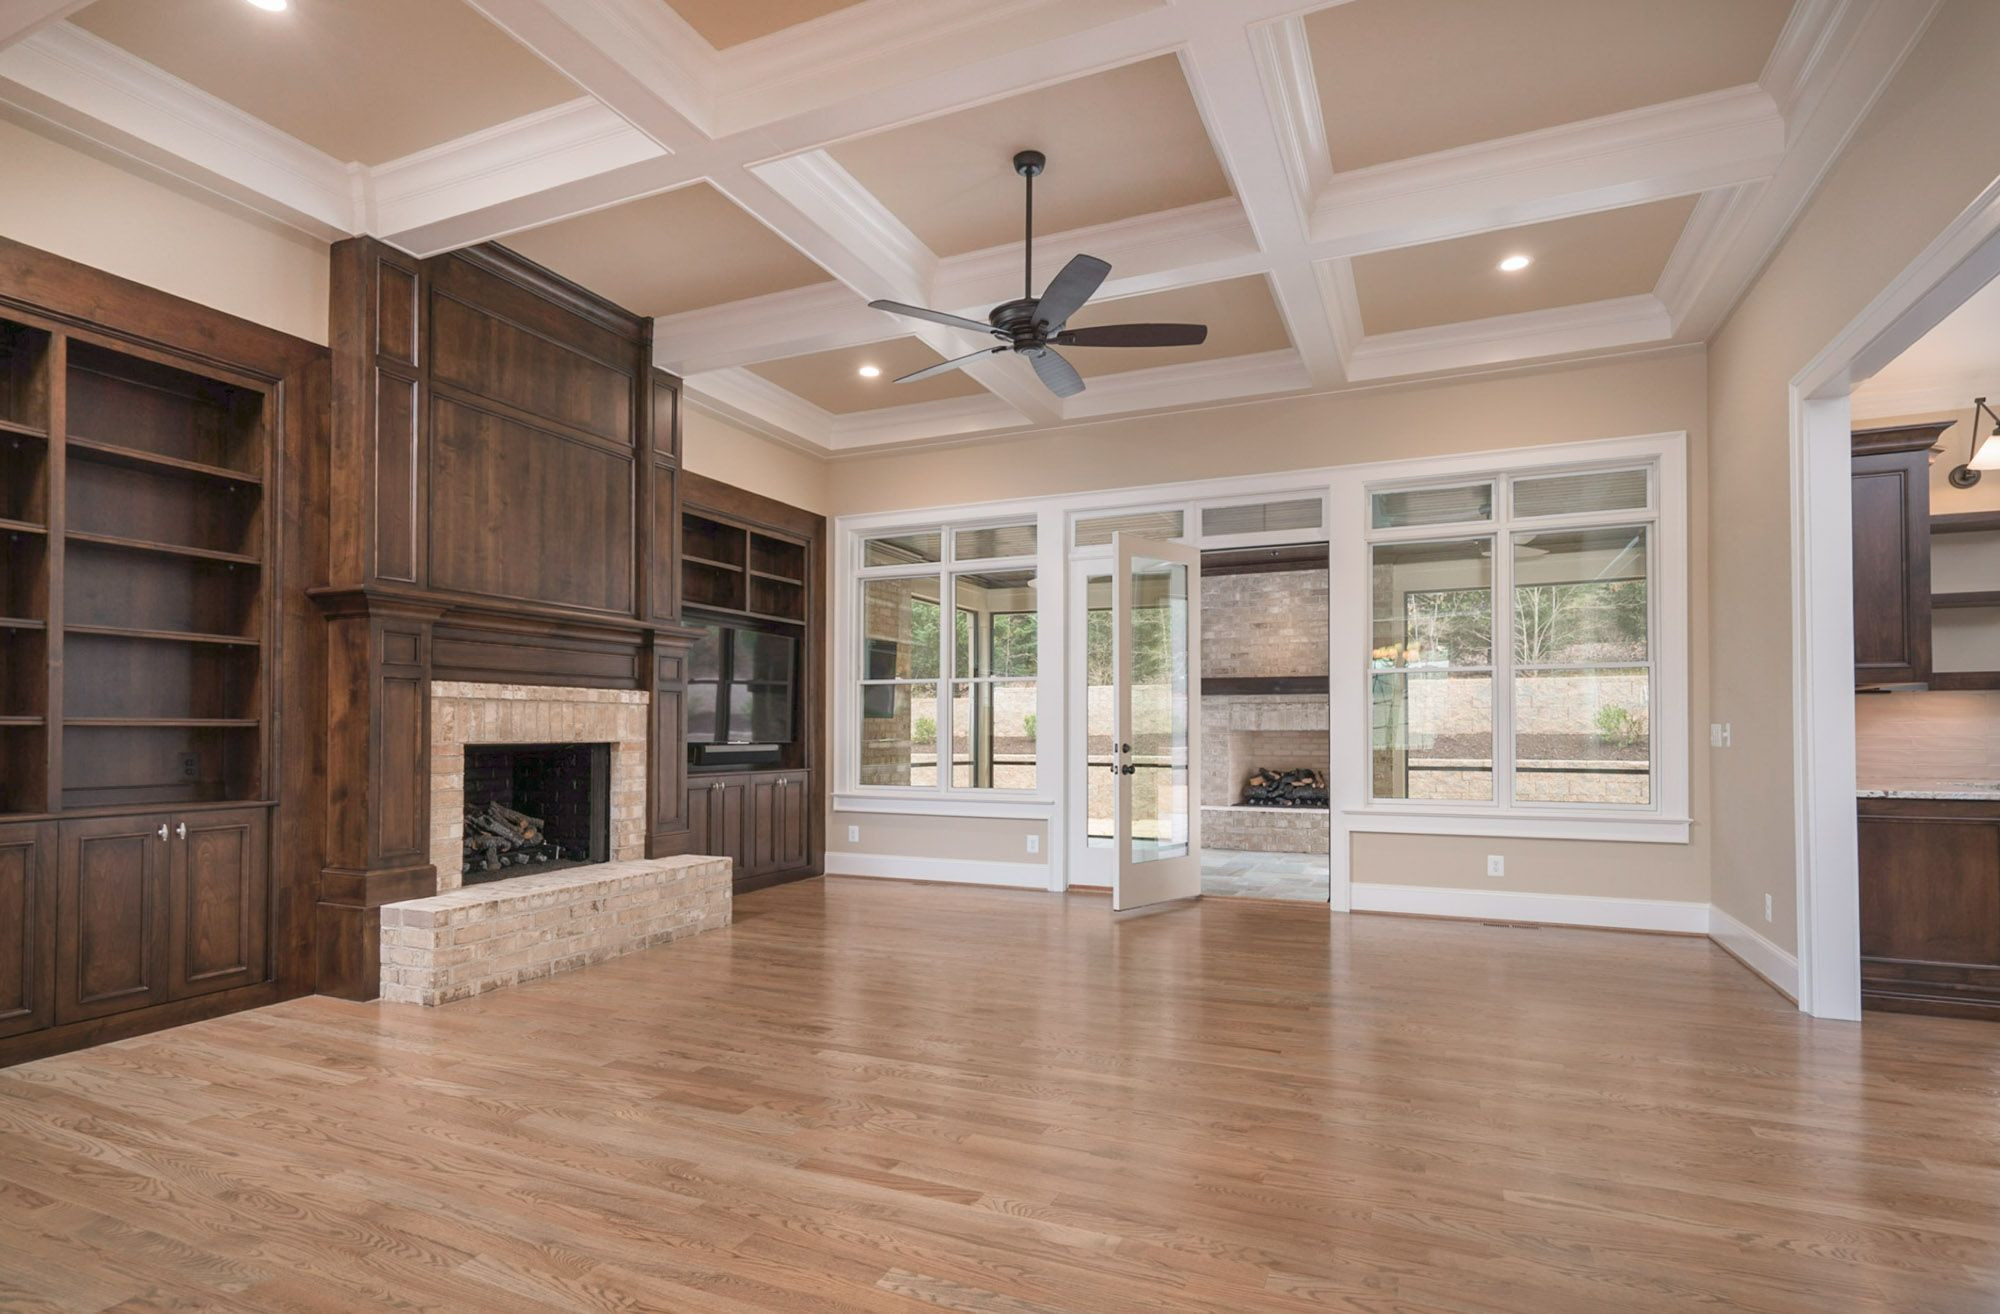 14 Nice Hardwood Floor Cleaning Greenville Sc 2024 free download hardwood floor cleaning greenville sc of brick wood fireplace idea love the custom built in shelving and intended for browse through this beautiful custom built home gallery in travelers res